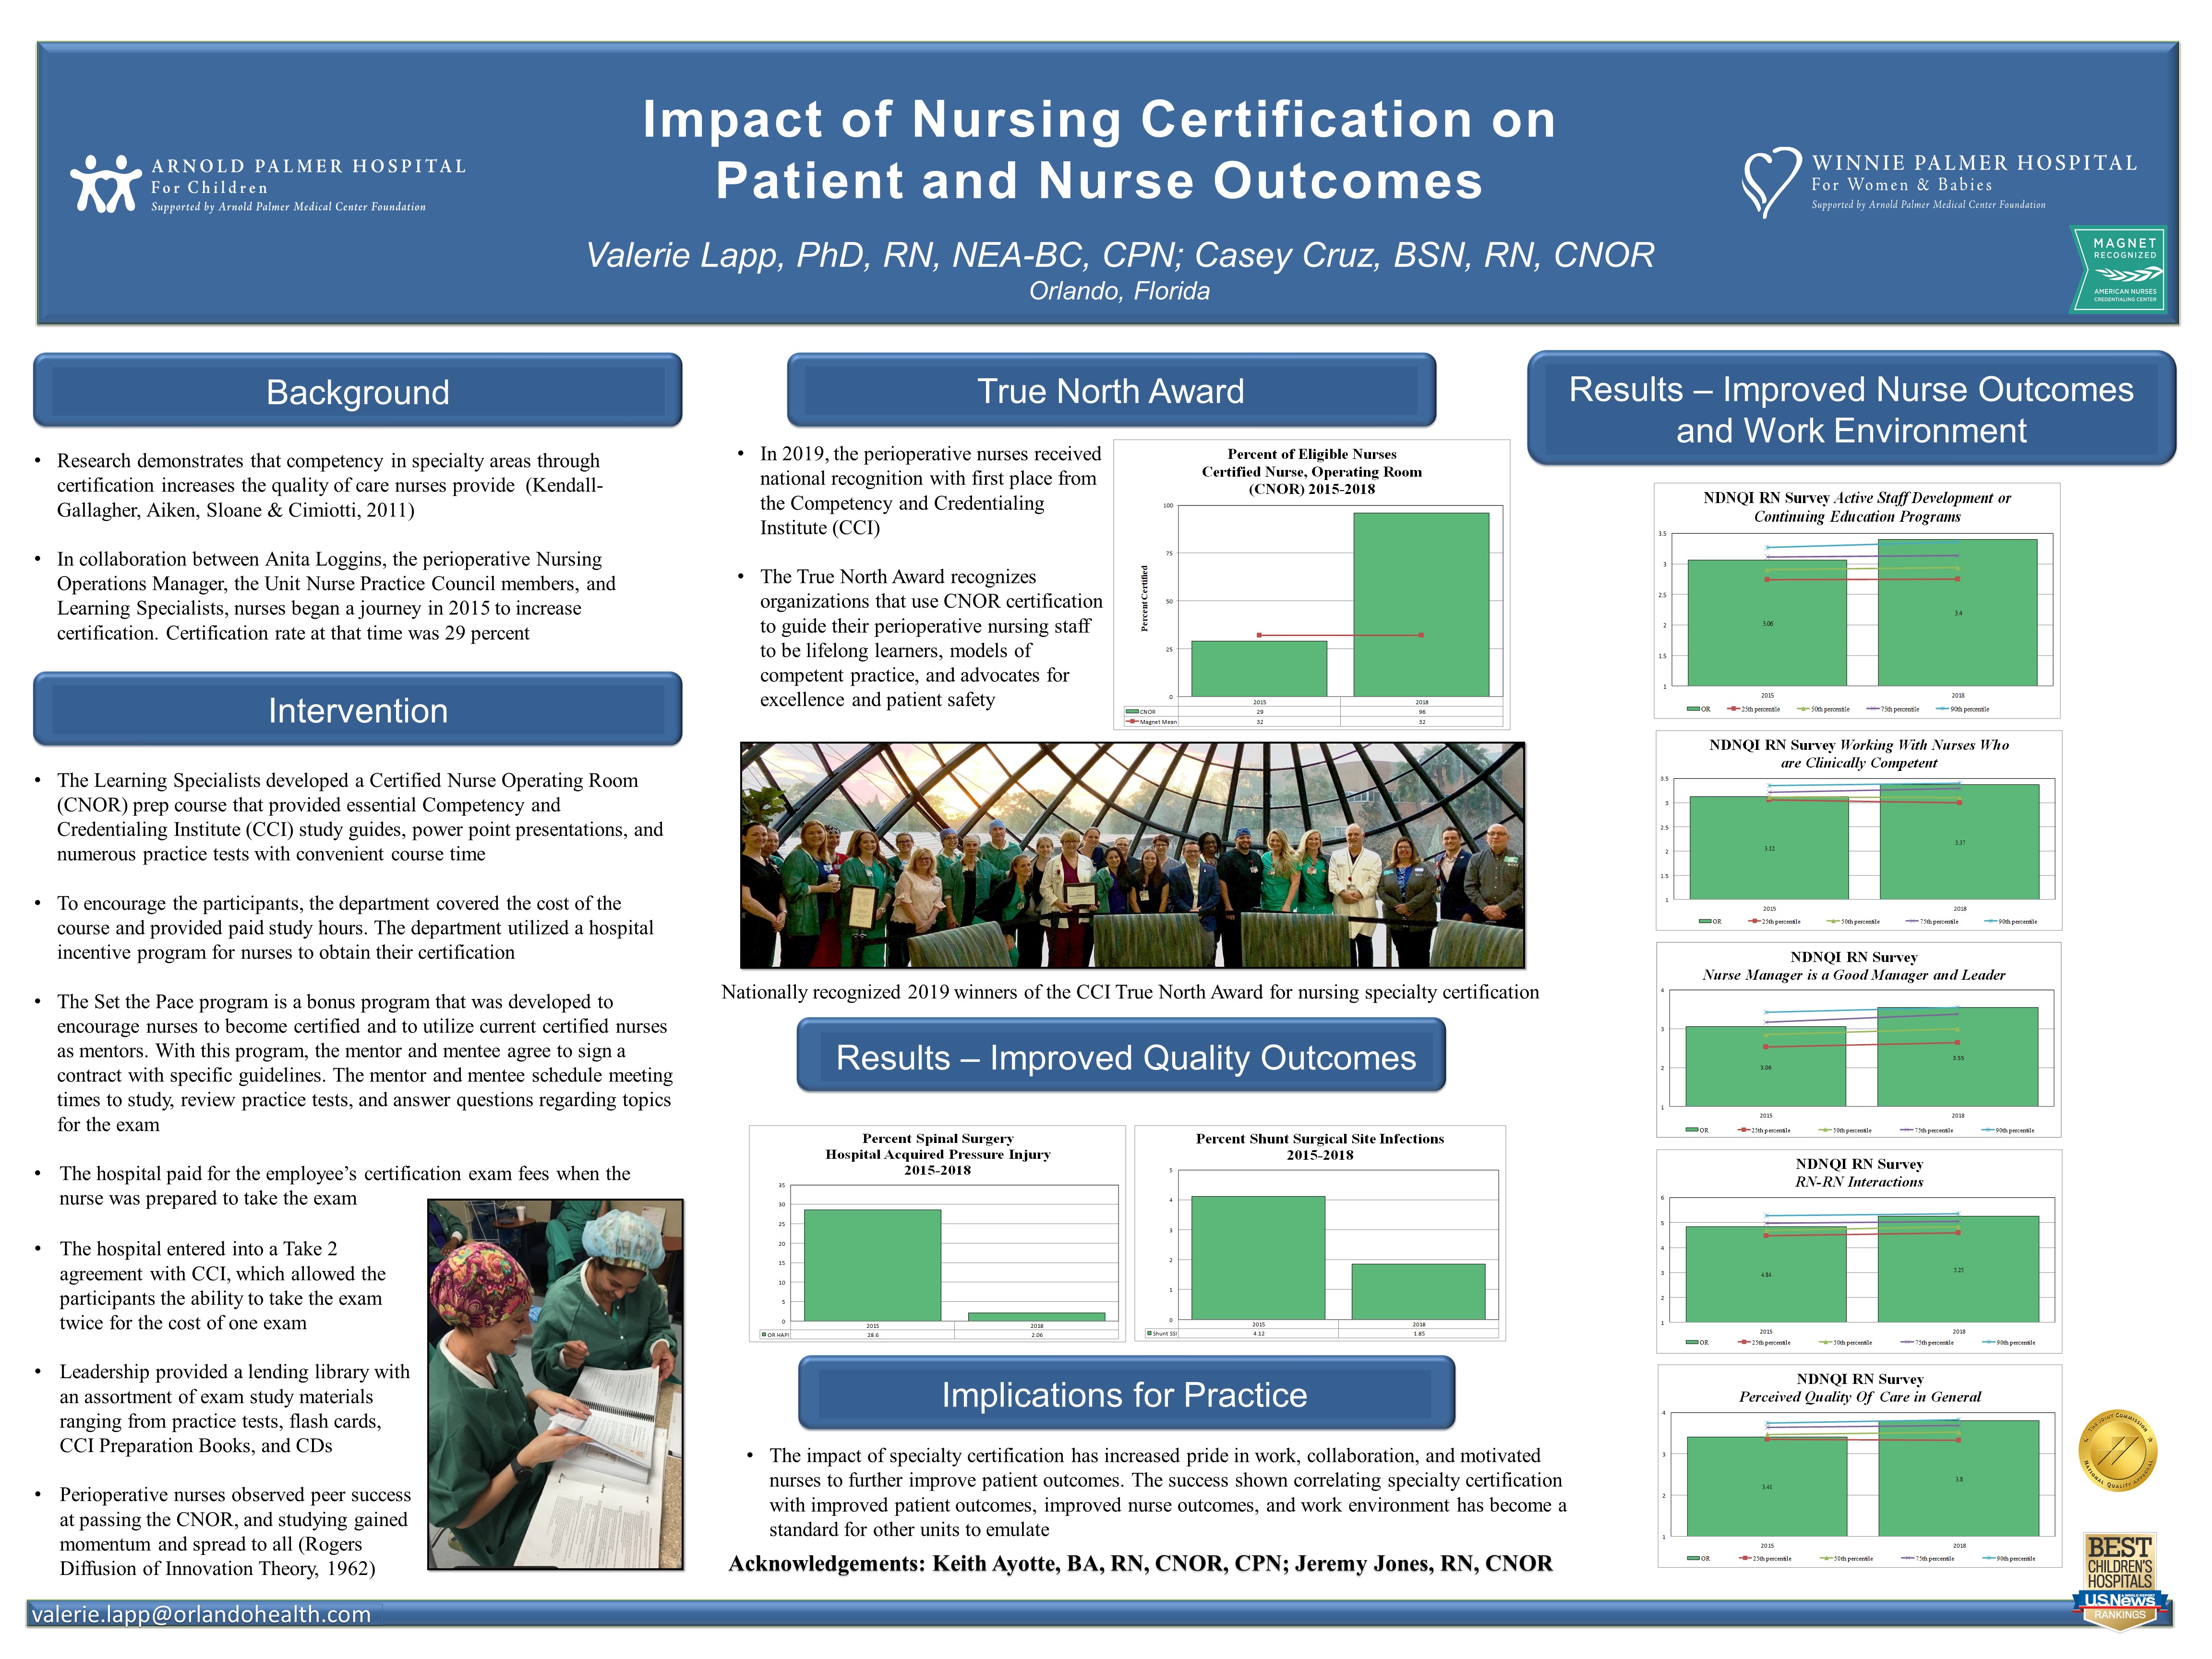 Impact of Nursing Certification on Patient and Nurse Outcomes